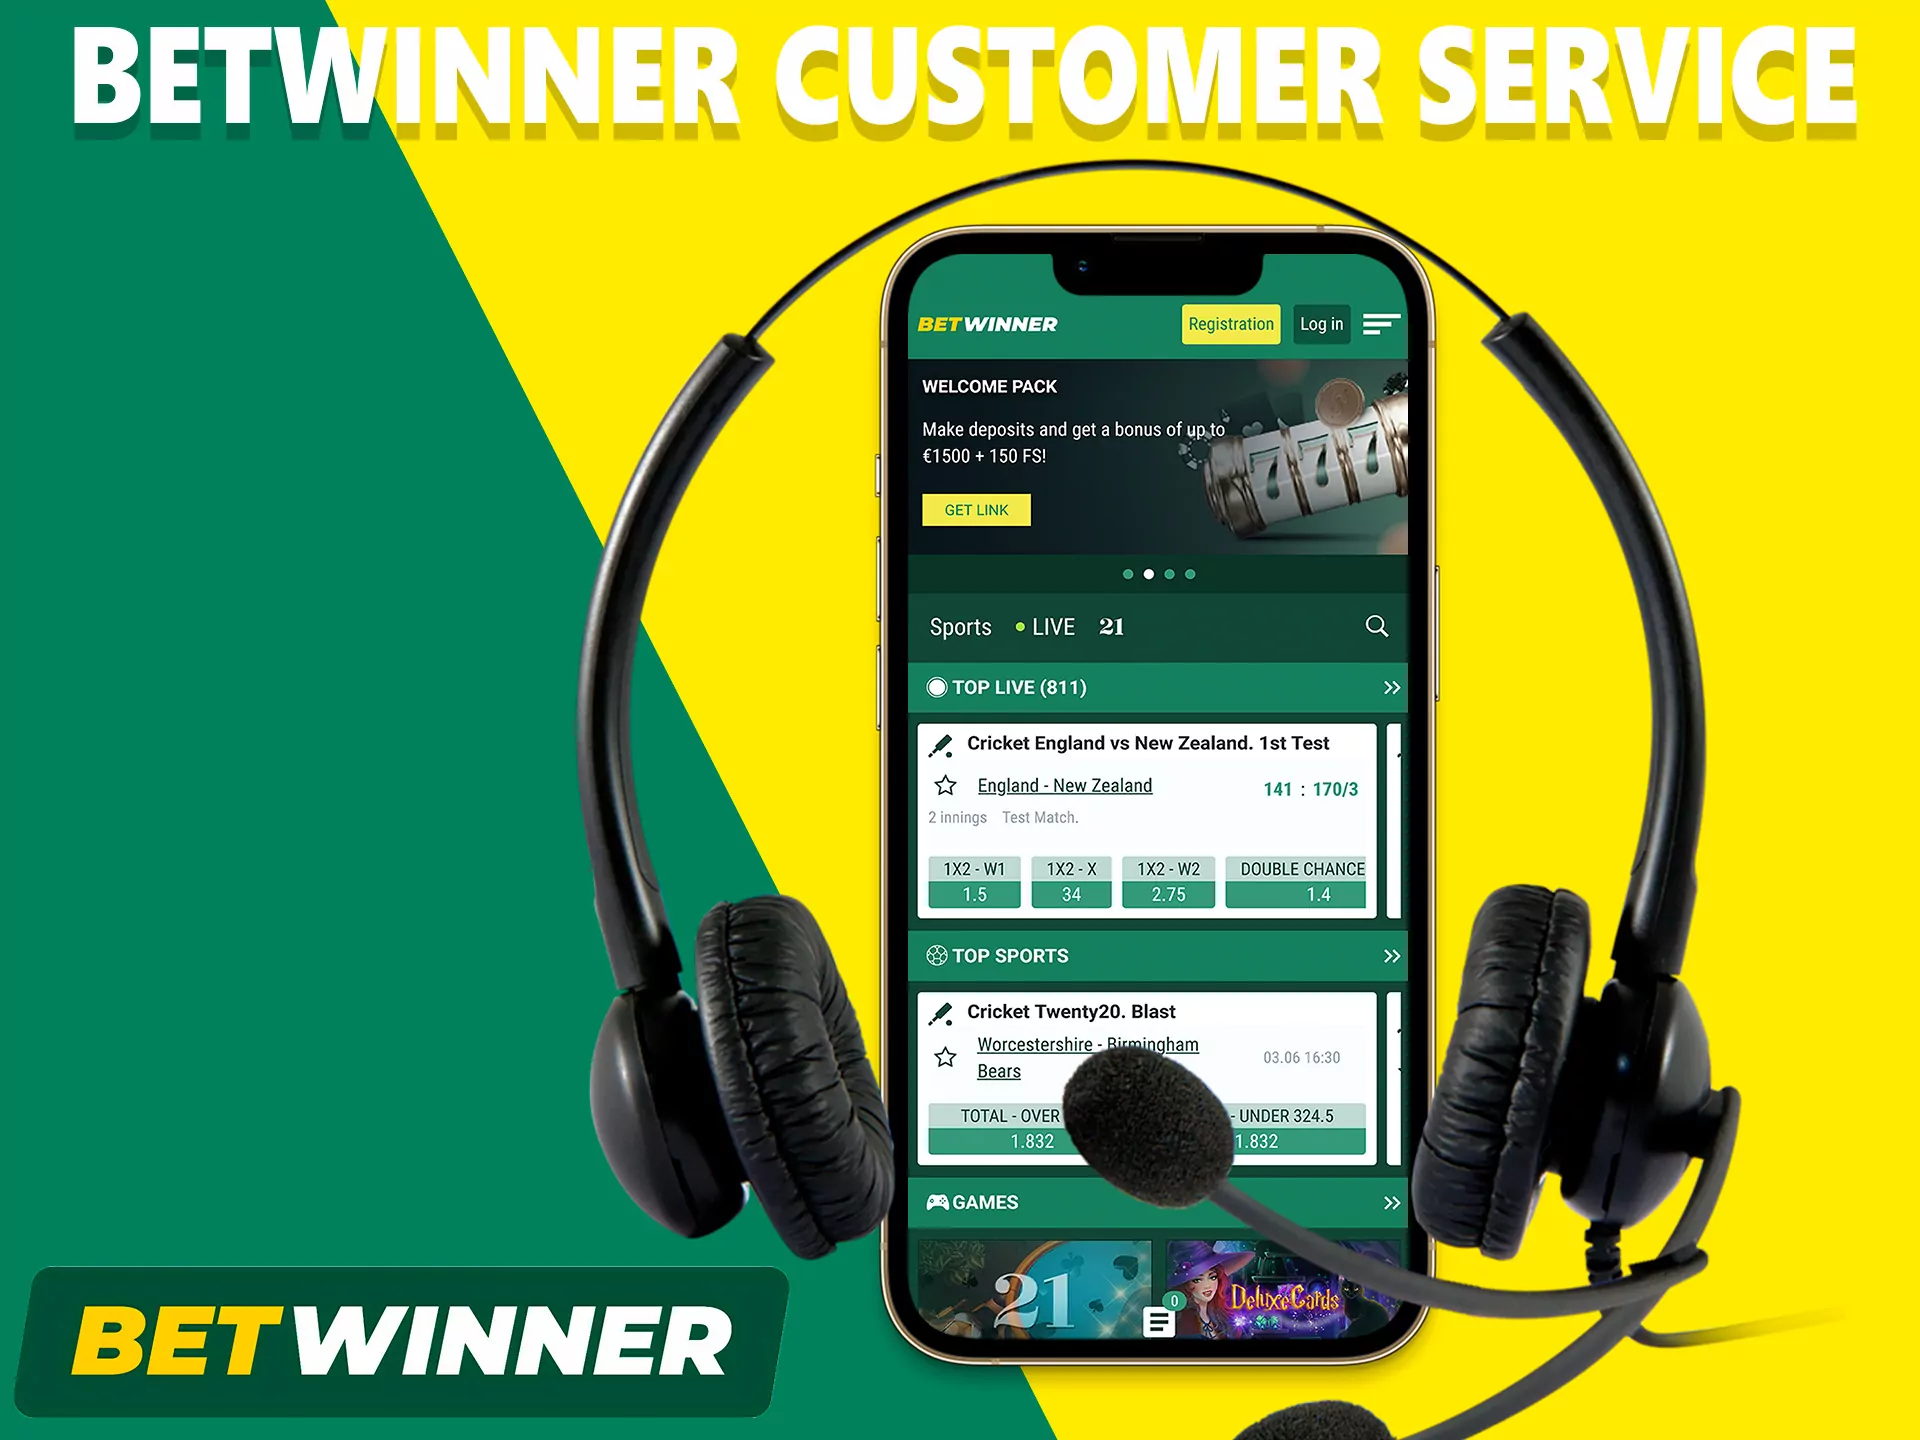 If you suddenly have questions about the operation of the application, the Betwinner support service will consult and answer your questions.